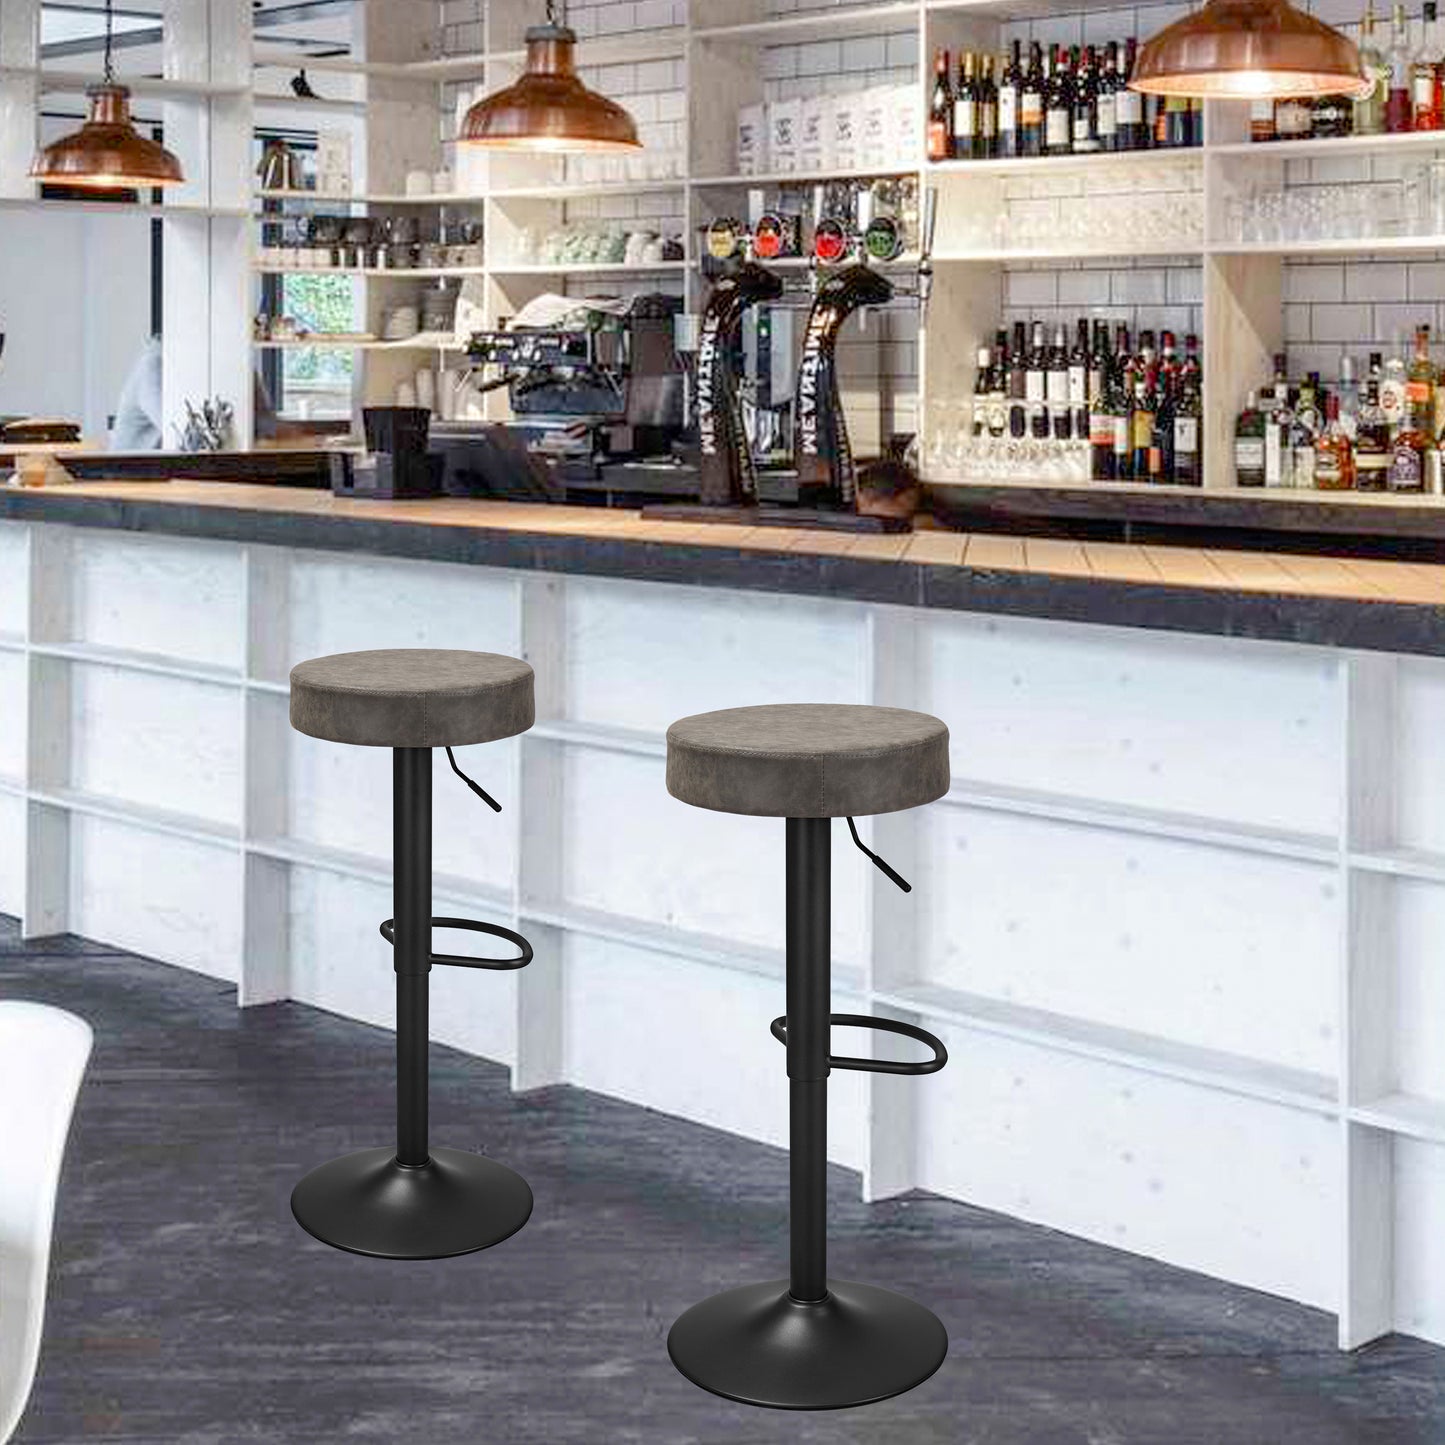 Finnhomy Bar Stools Set of 2 Counter Height, Swivel Barstools with Footrest and Backless Round, Height Adjustable Modern Bar stools for Kitchen, Vintage Leather, Retro Grey